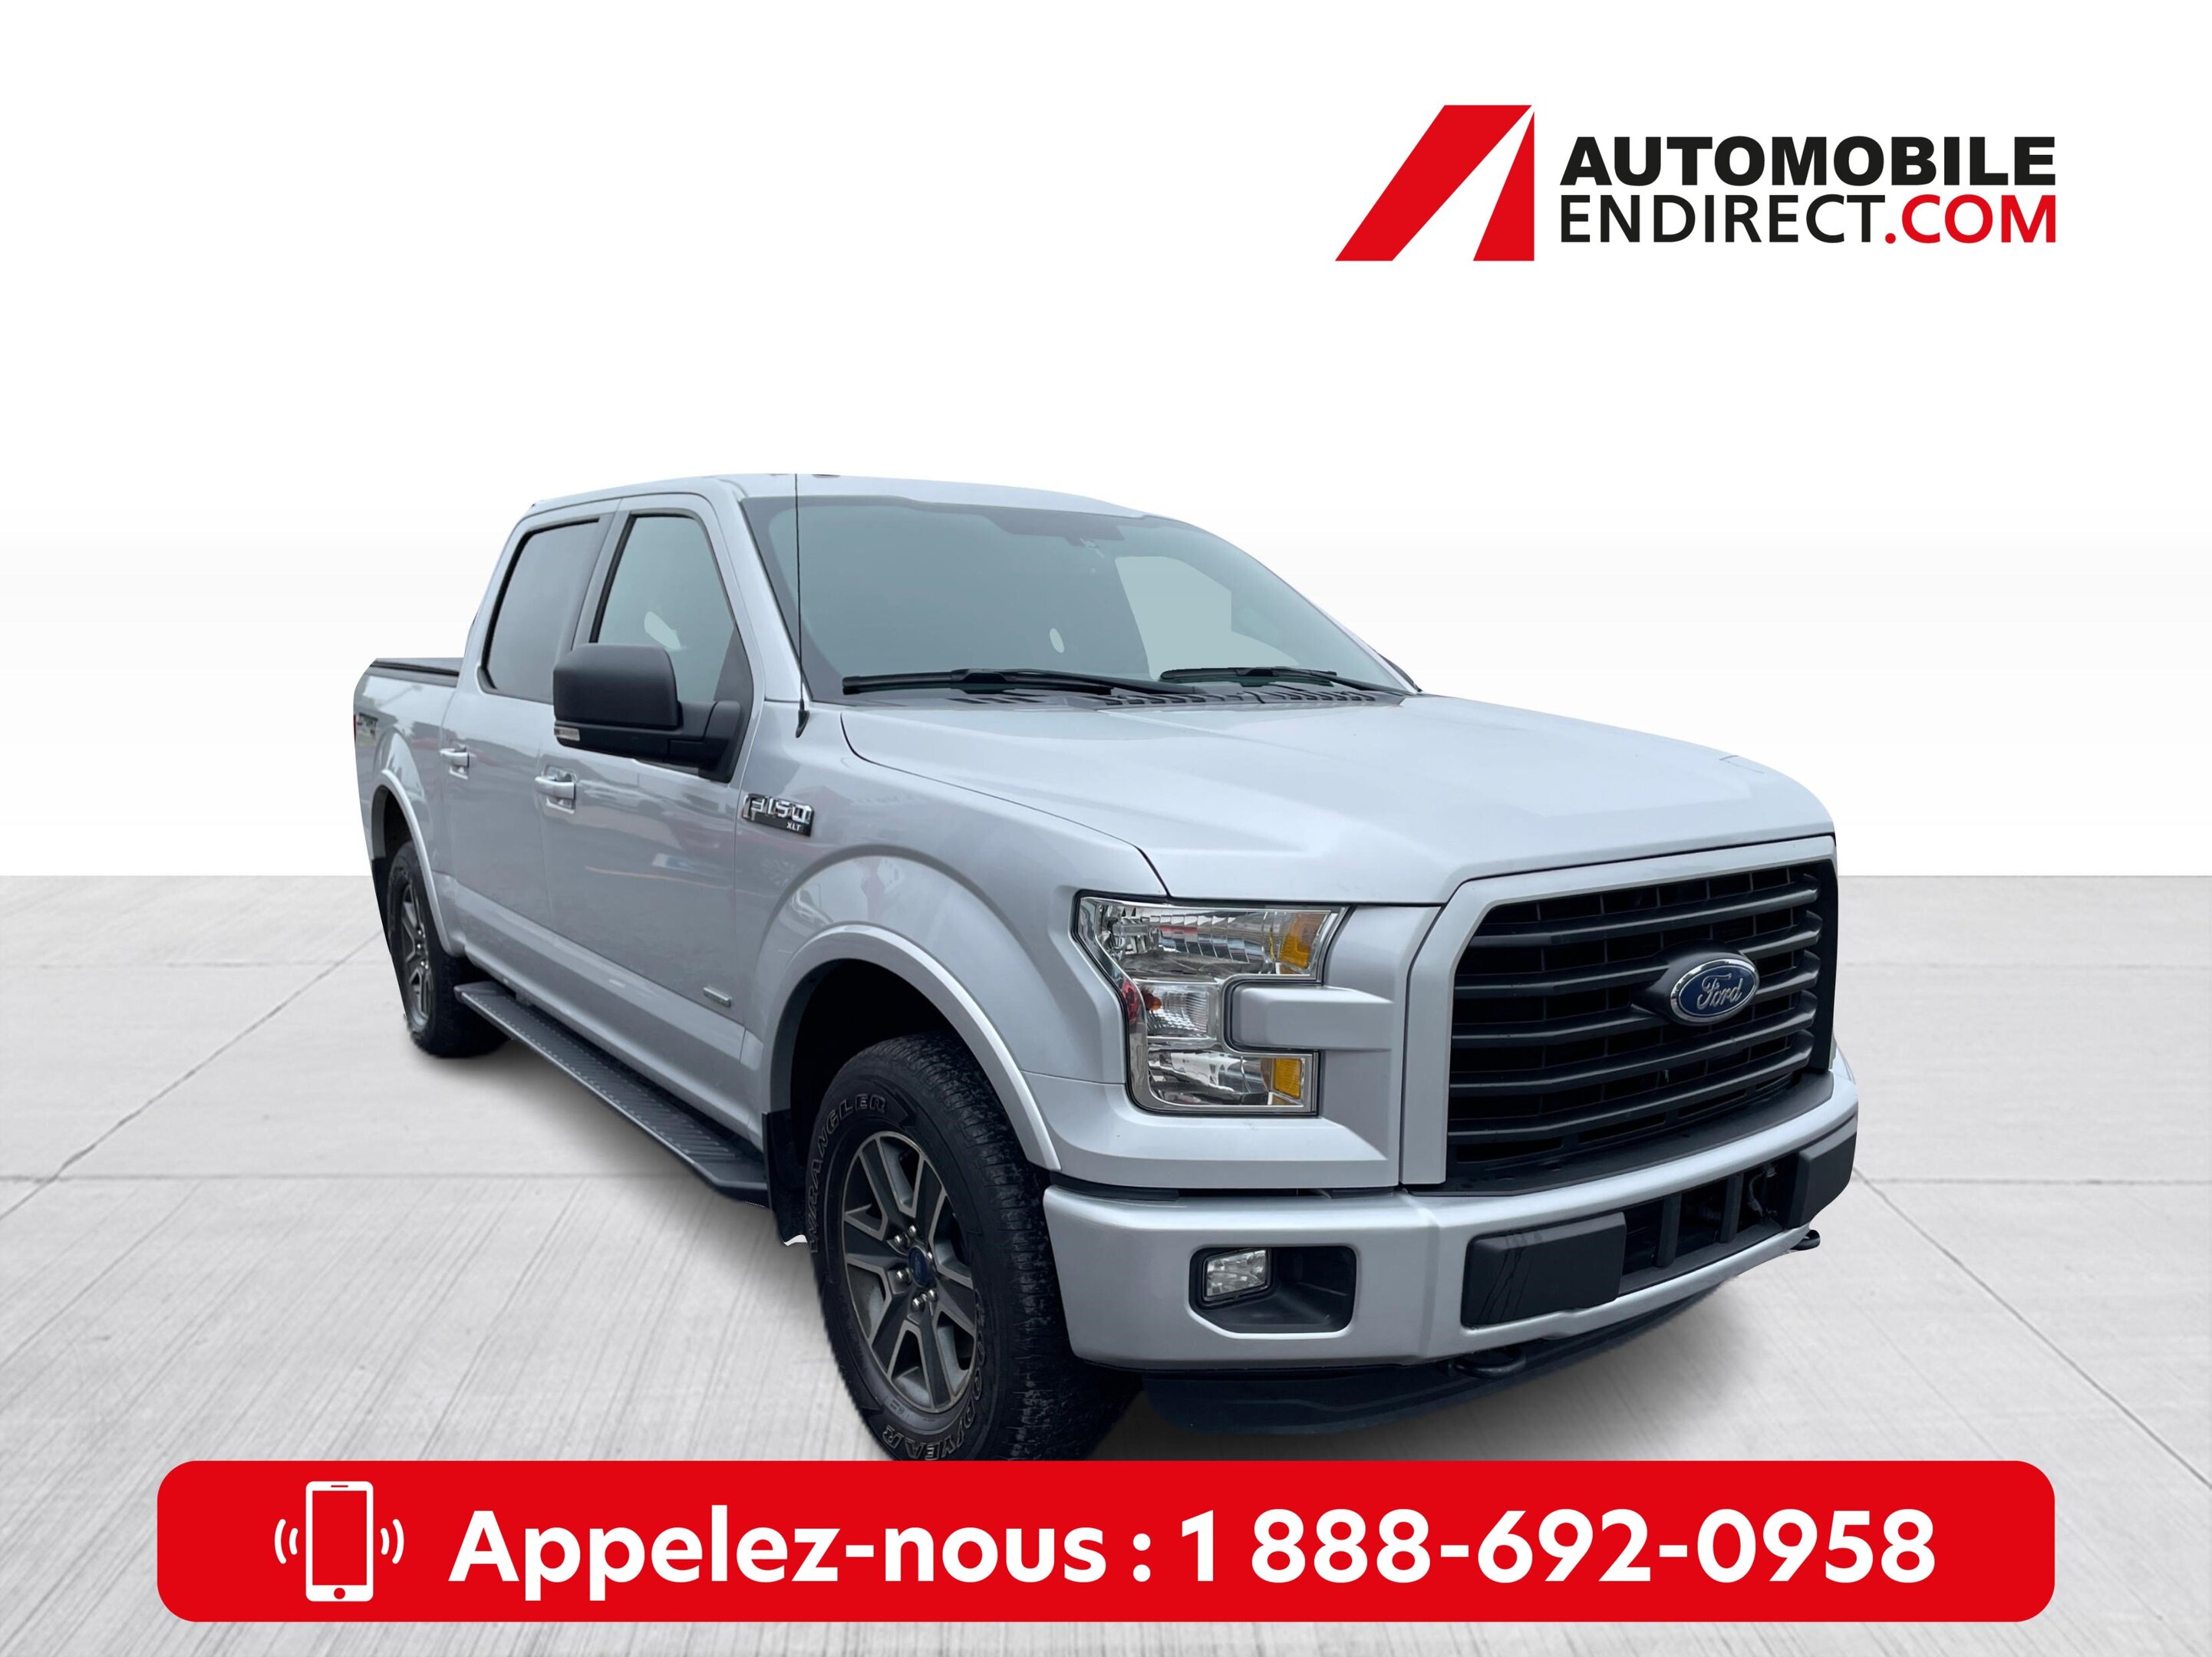 2016 Ford F-150 XLT SPORT CREW 4X4 2.7 MAGS 18